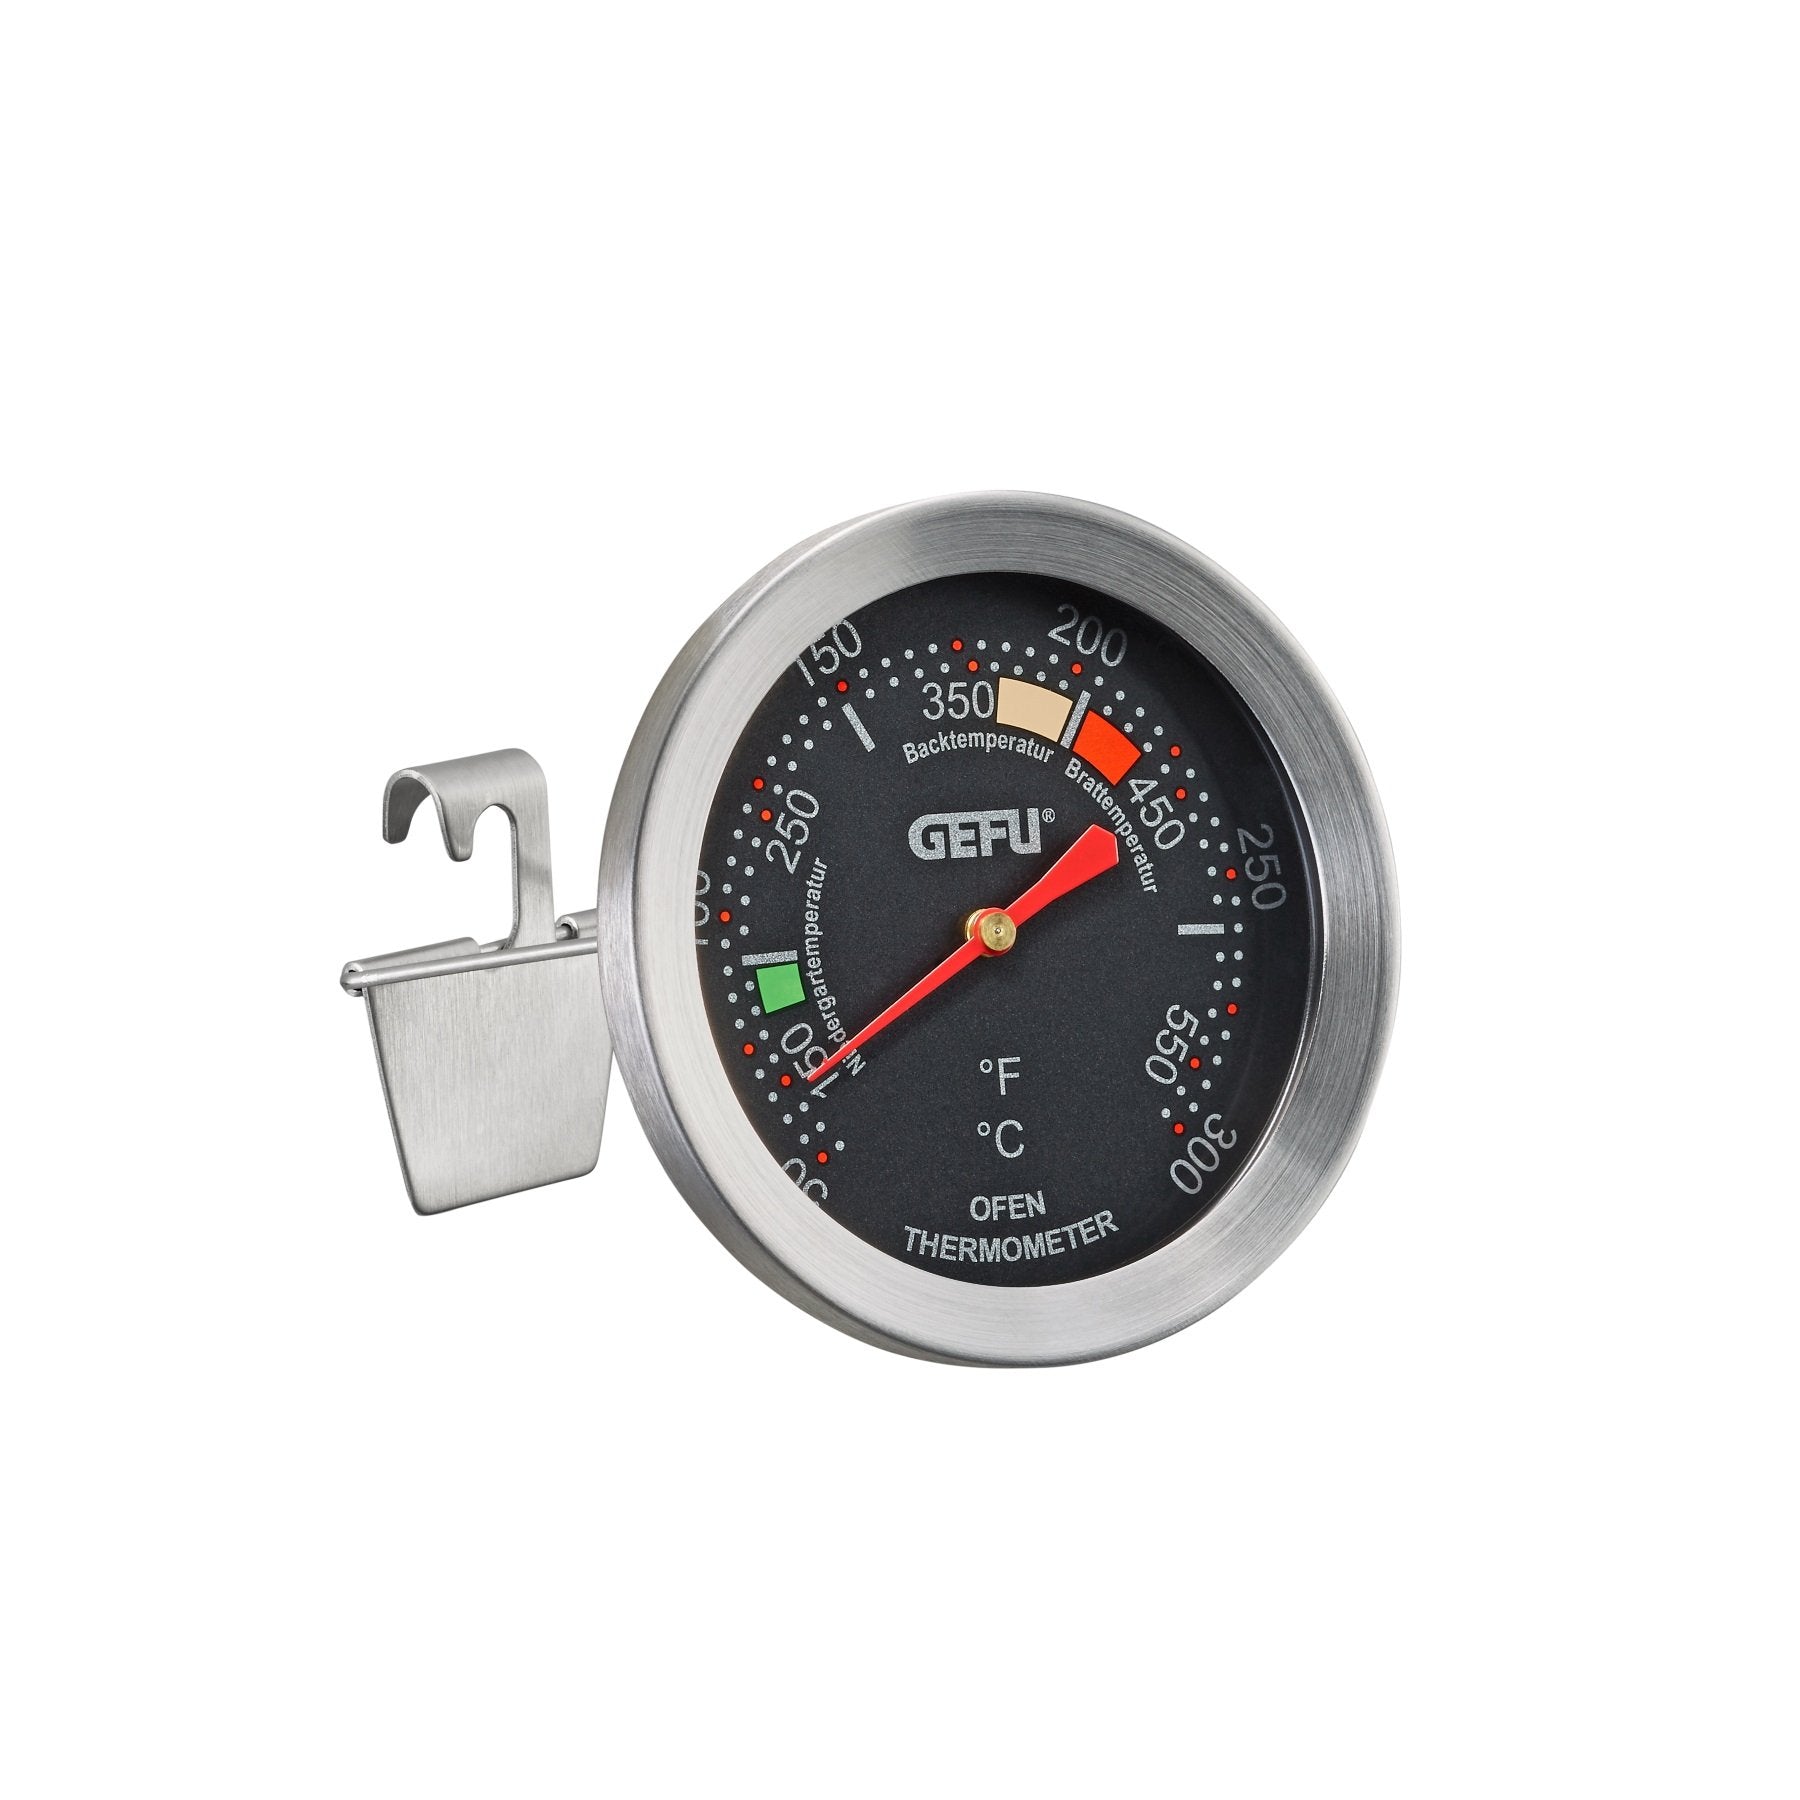 GEFU Oven Thermometer Messimo - Whole and All